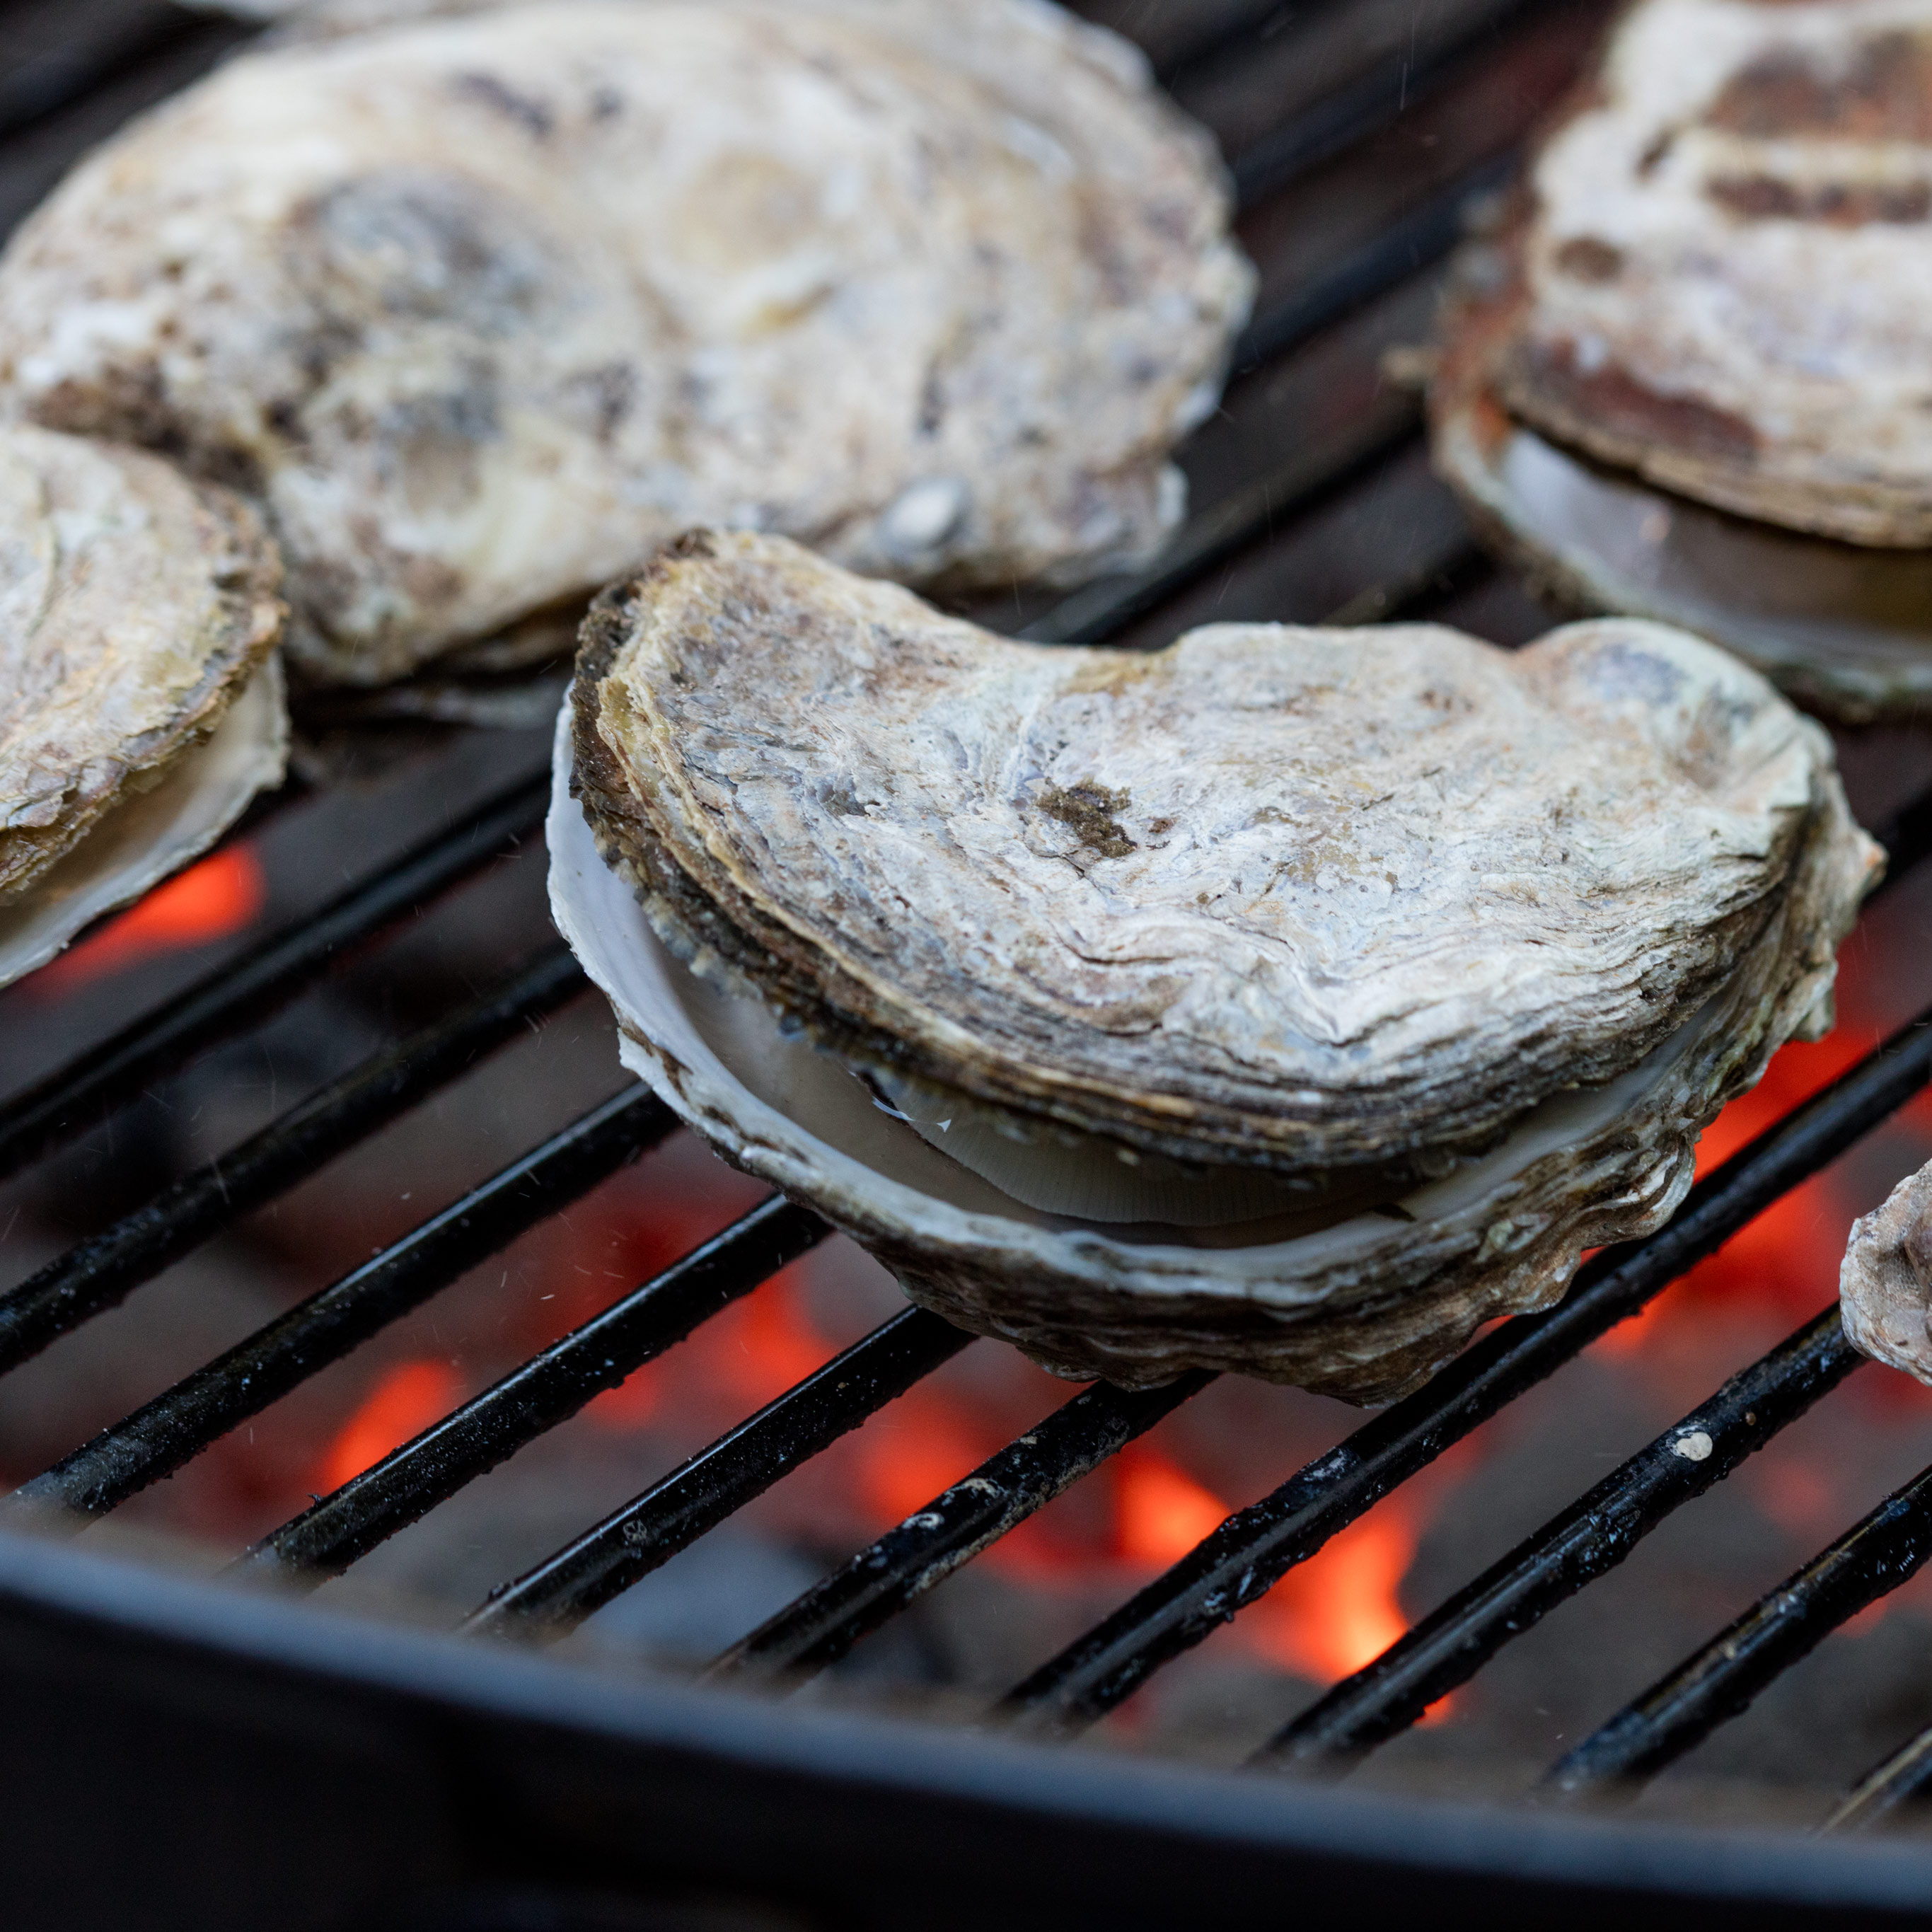 https://res.cloudinary.com/hksqkdlah/image/upload/32767_sfs-grilled-clams-mussels-or-oysters-040.jpg